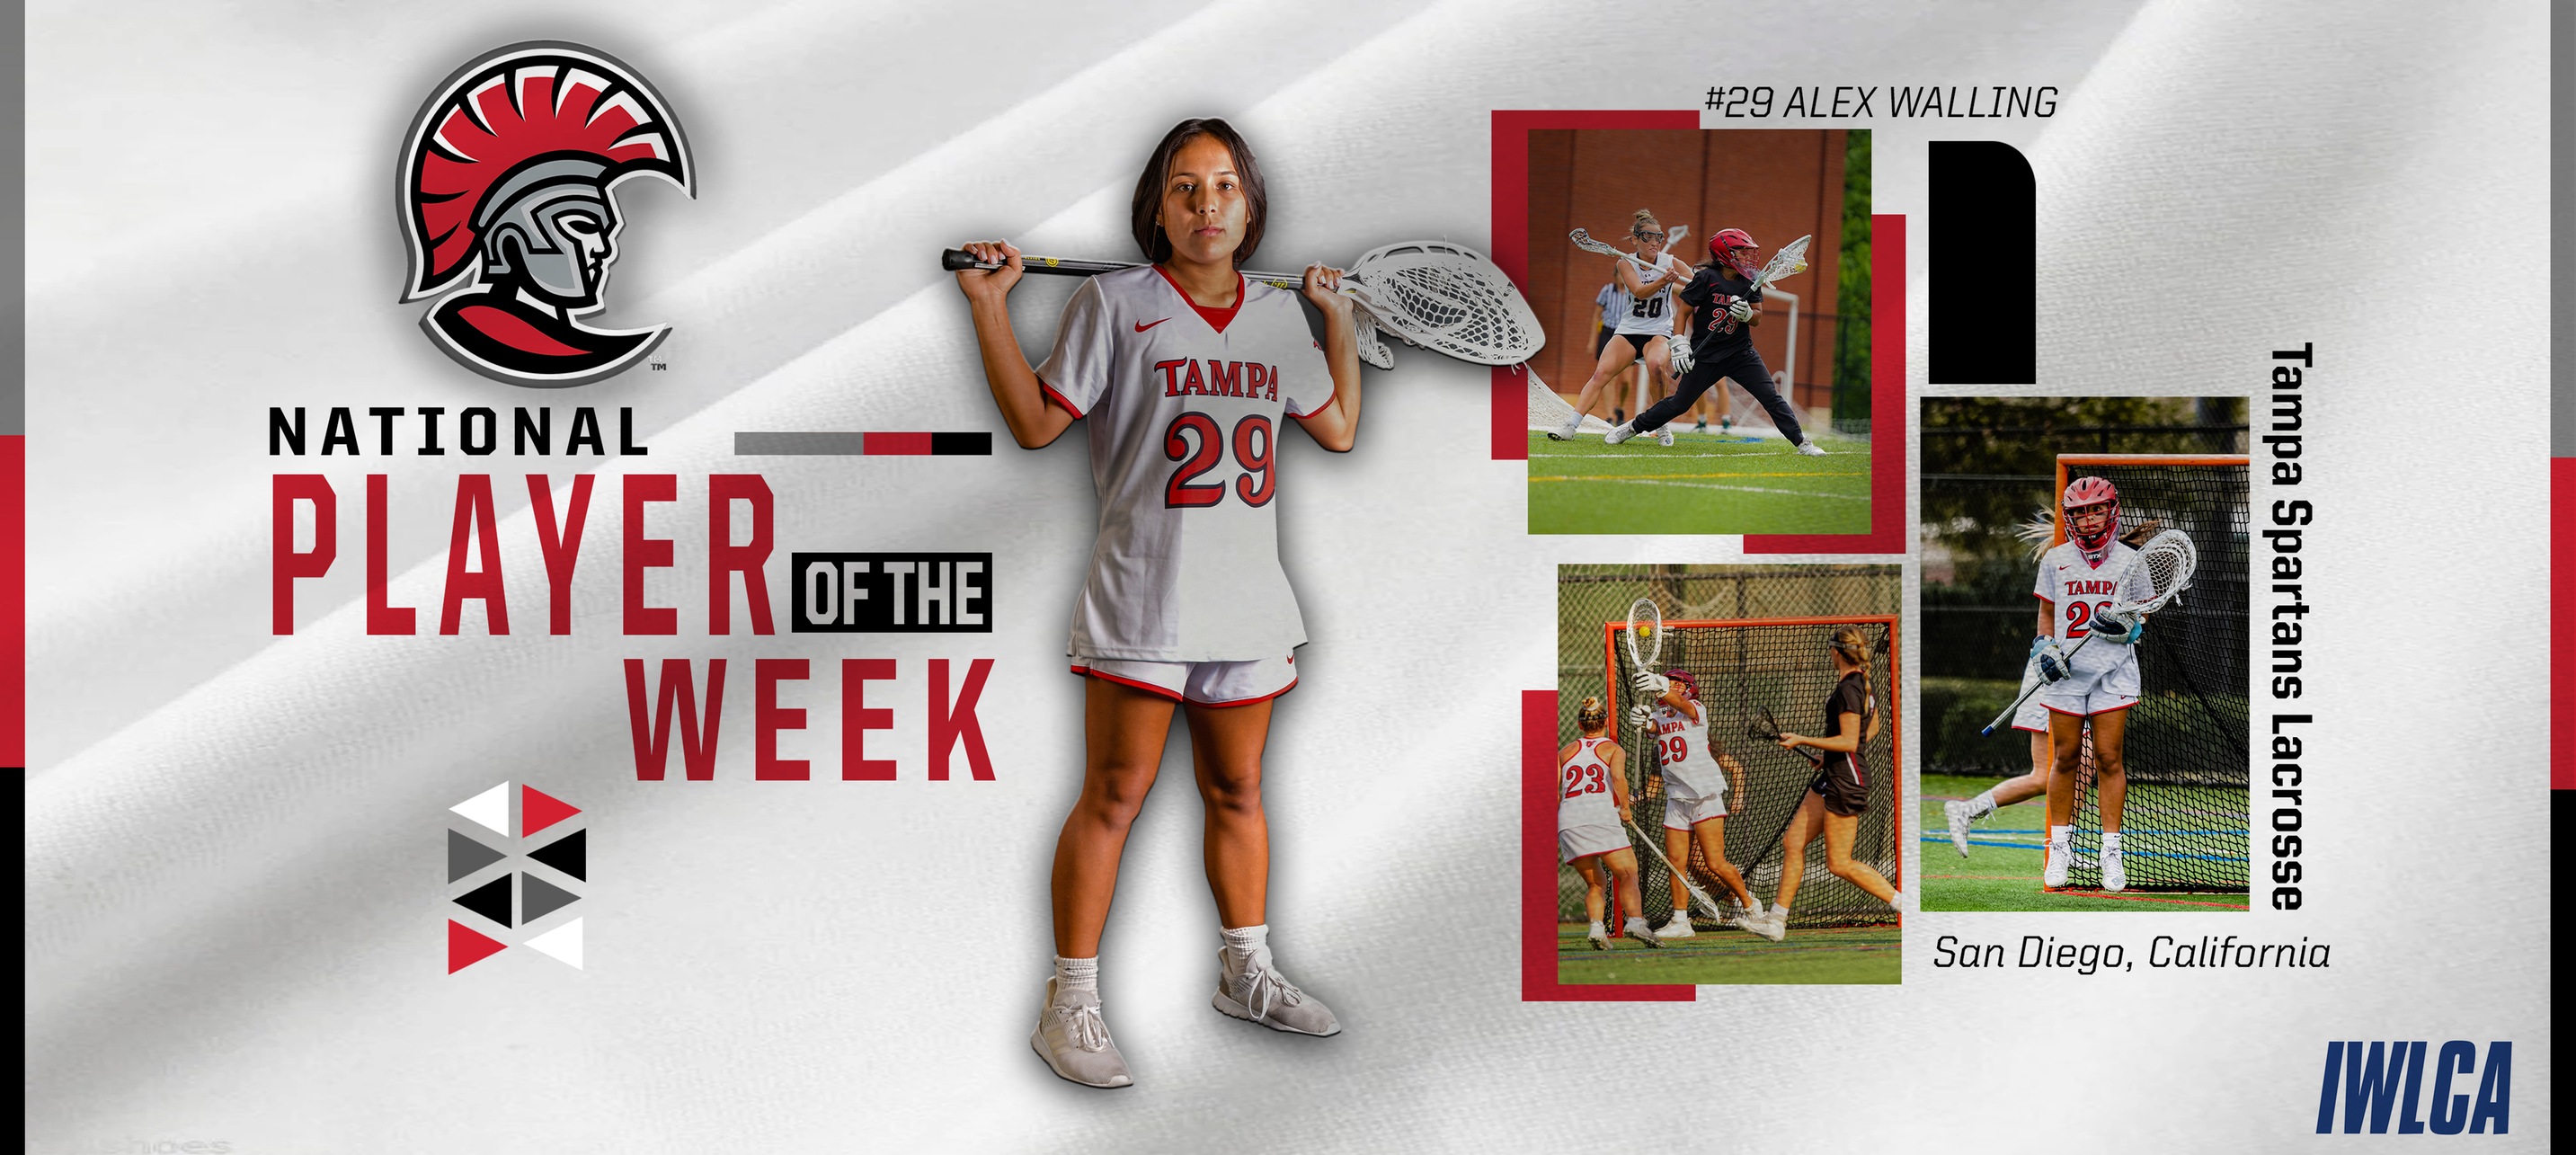 Alex Walling National Player of the Week